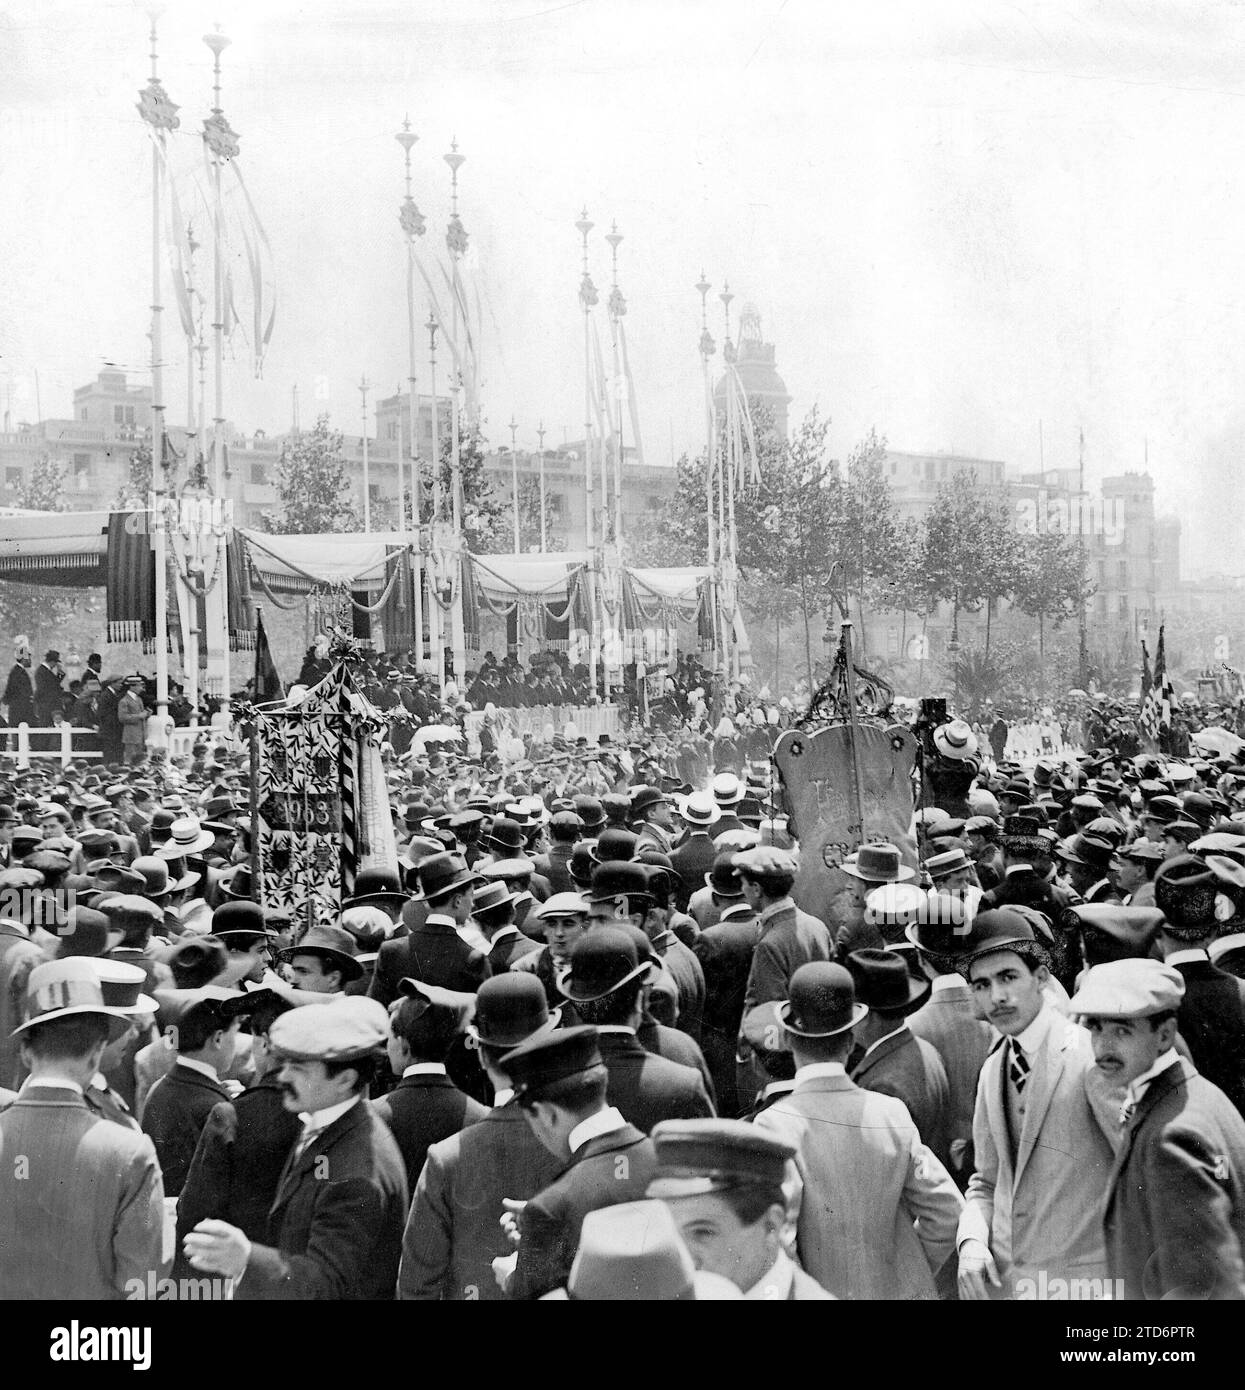 04/30/1909. Photo Ballell. Barcelona. The tribute to Guimera. Appearance of the Plaza de Cataluña at the time of the demonstration passing in front of the tribune occupied by Mr. Guimera. Credit: Album / Archivo ABC / Federico Ballell Stock Photo